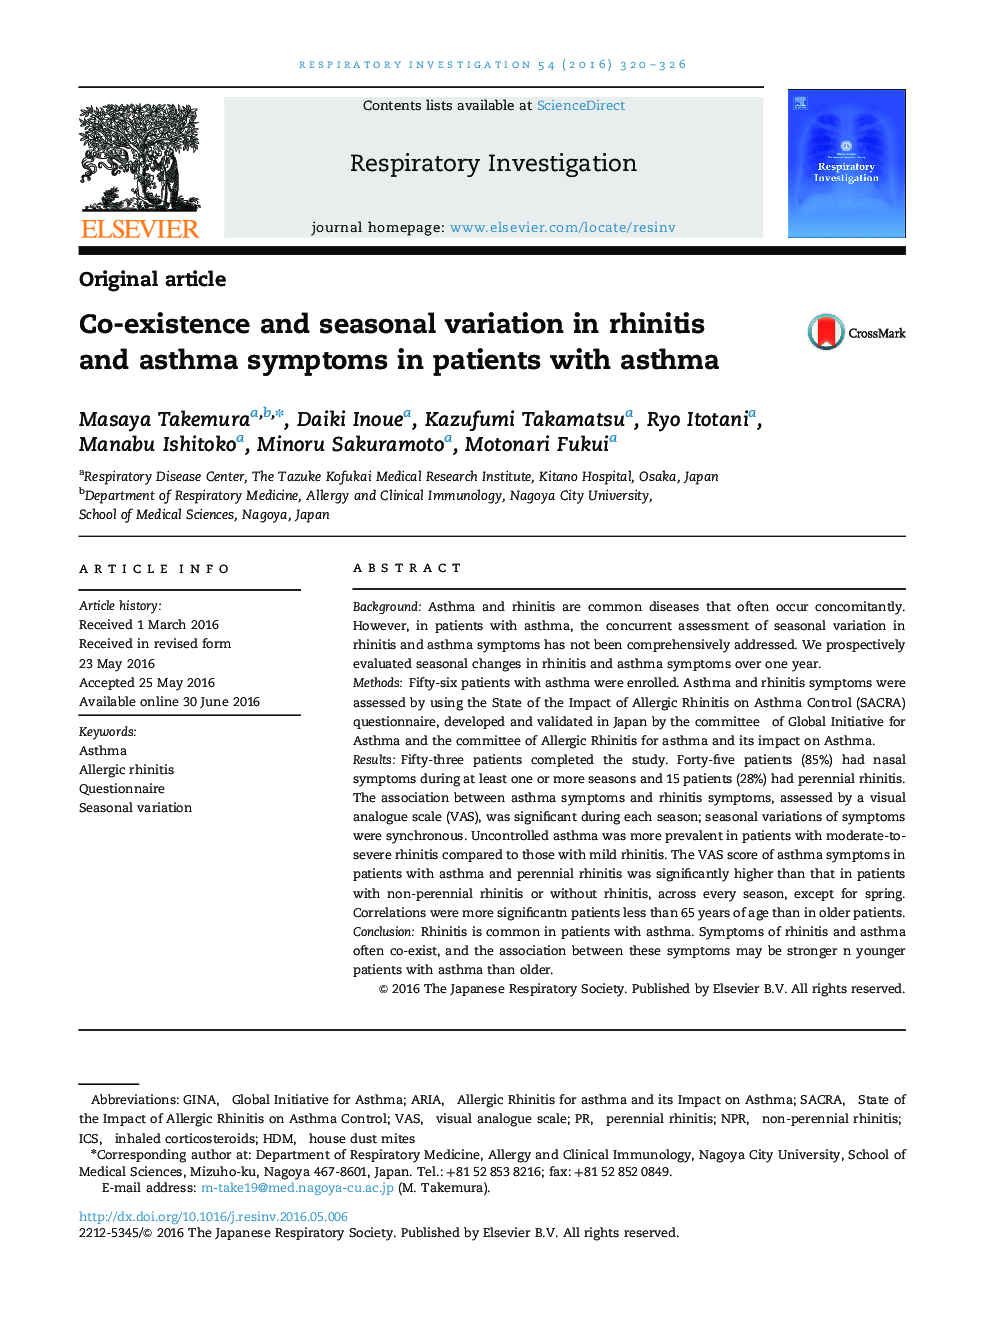 Co-existence and seasonal variation in rhinitis and asthma symptoms in patients with asthma